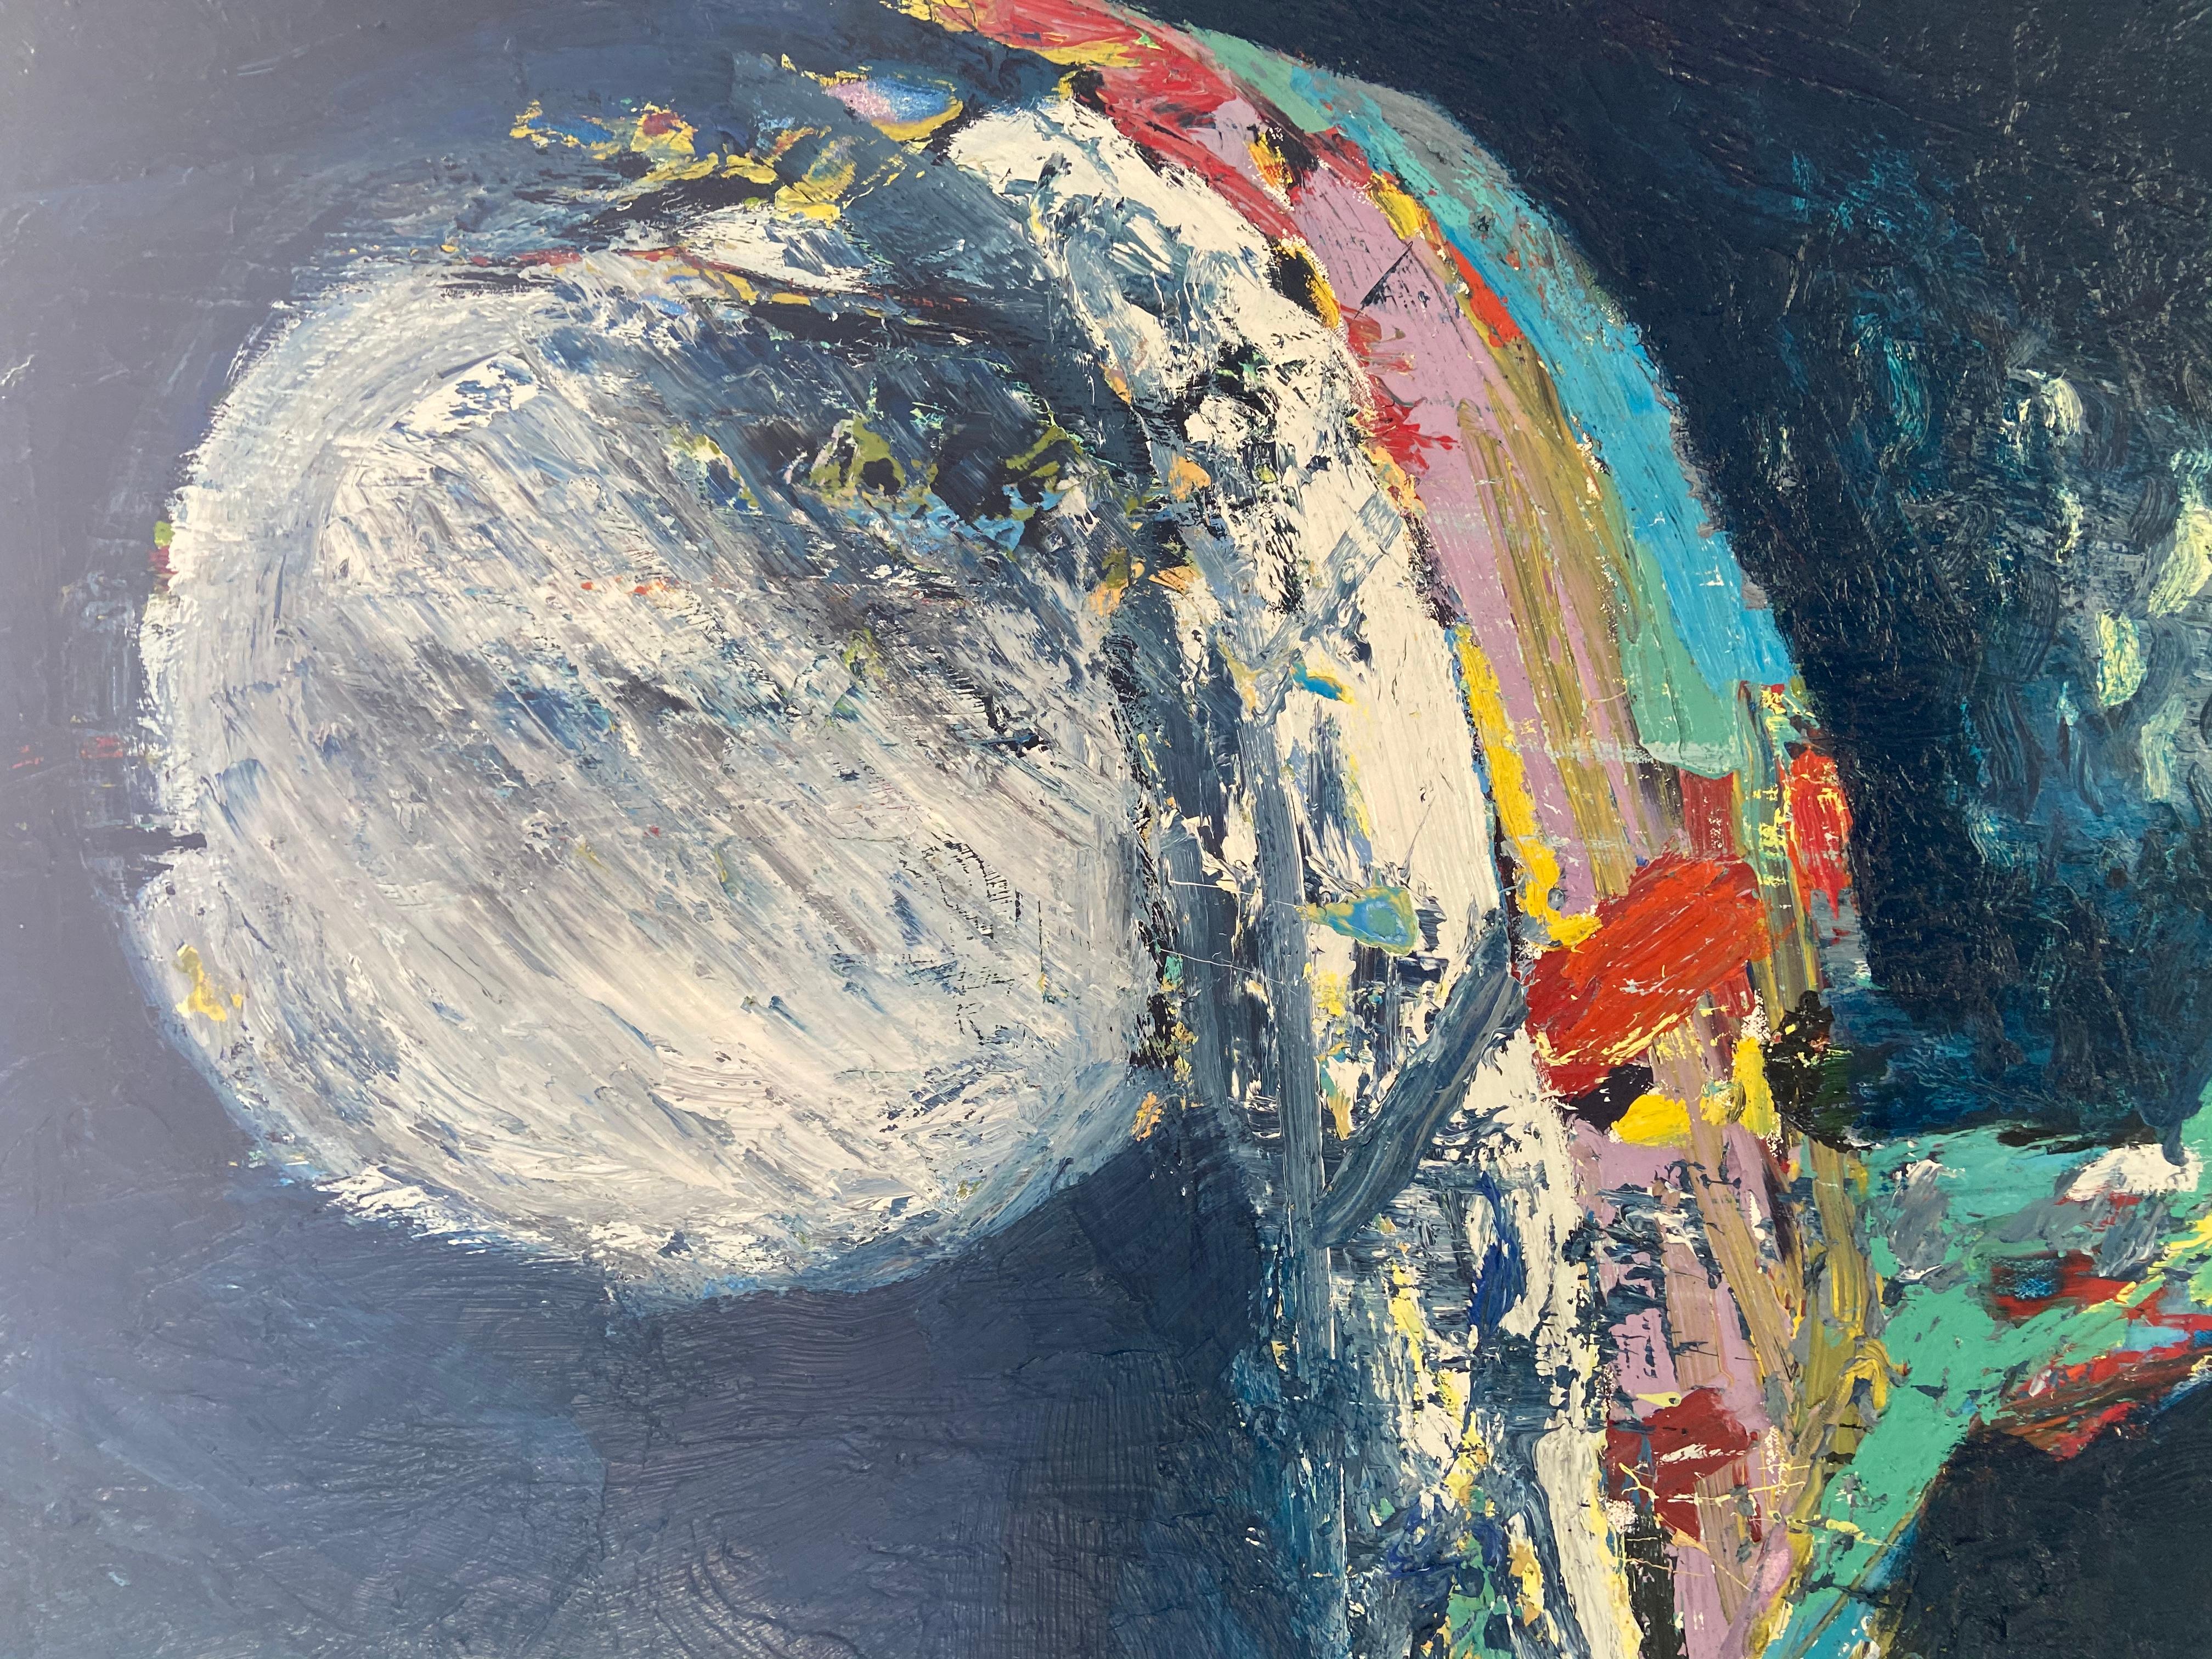 From the Artist's 2020 India Series. Centred round Kerala in southern India. Large vibrant abstract expressionist paintings from this well collected artist.

Signed